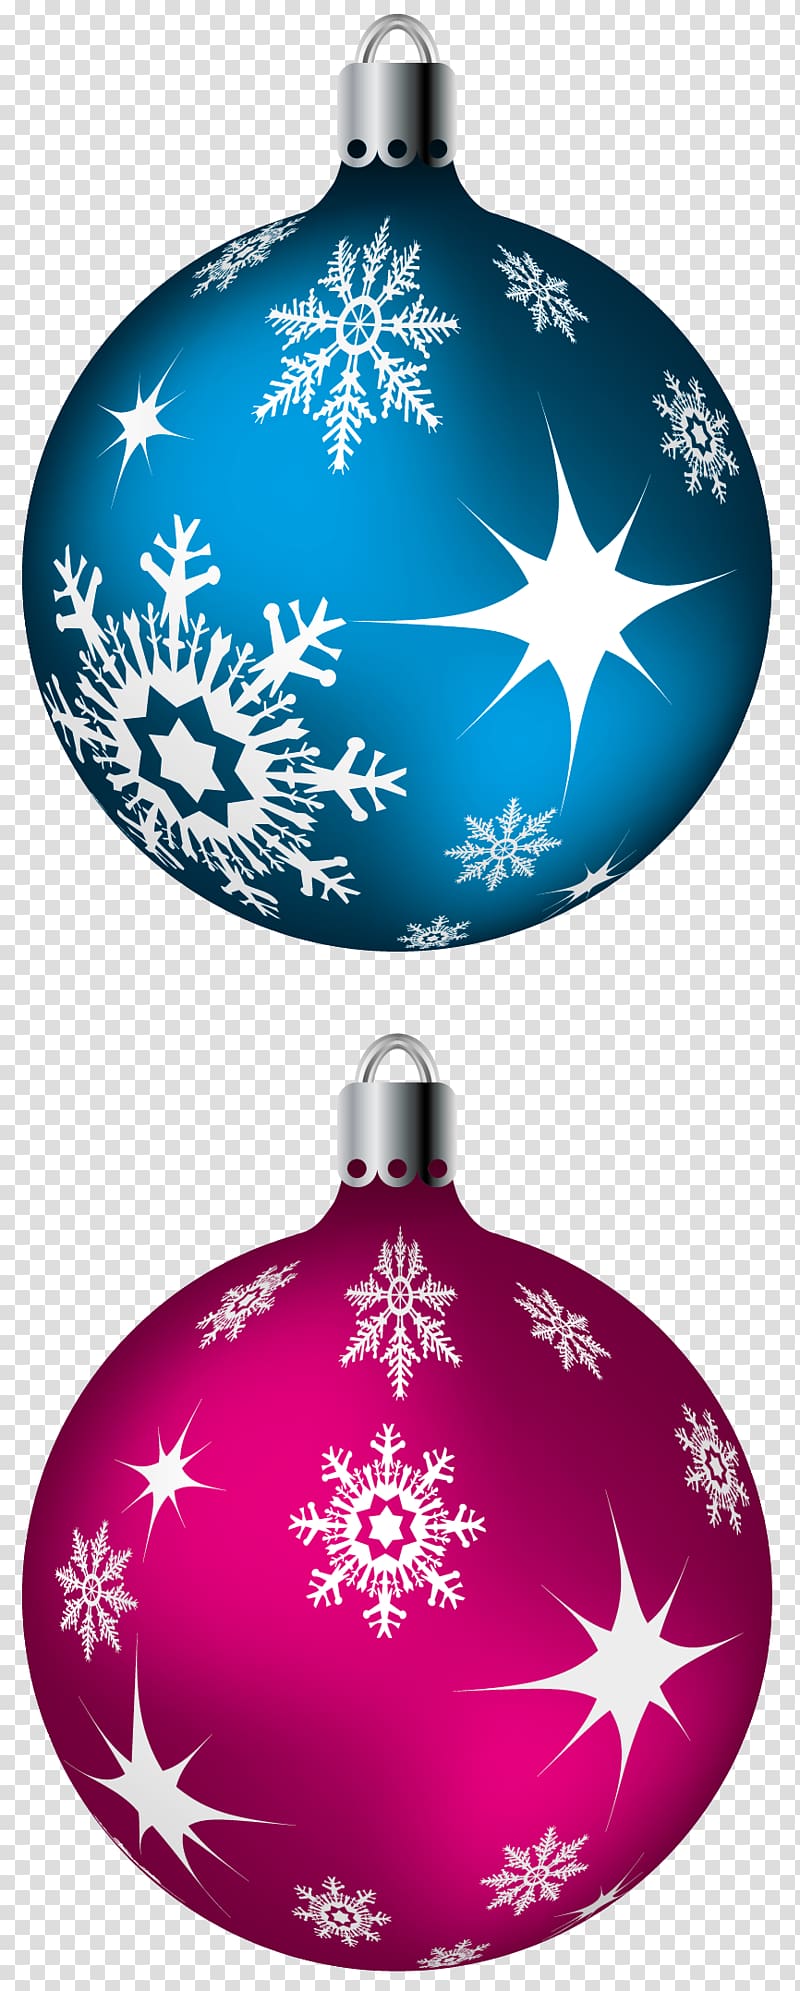 purple and blue snowflakes print baubles, Christmas ornament Christmas decoration Christmas tree , Blue and Pink Christmas Balls transparent background PNG clipart